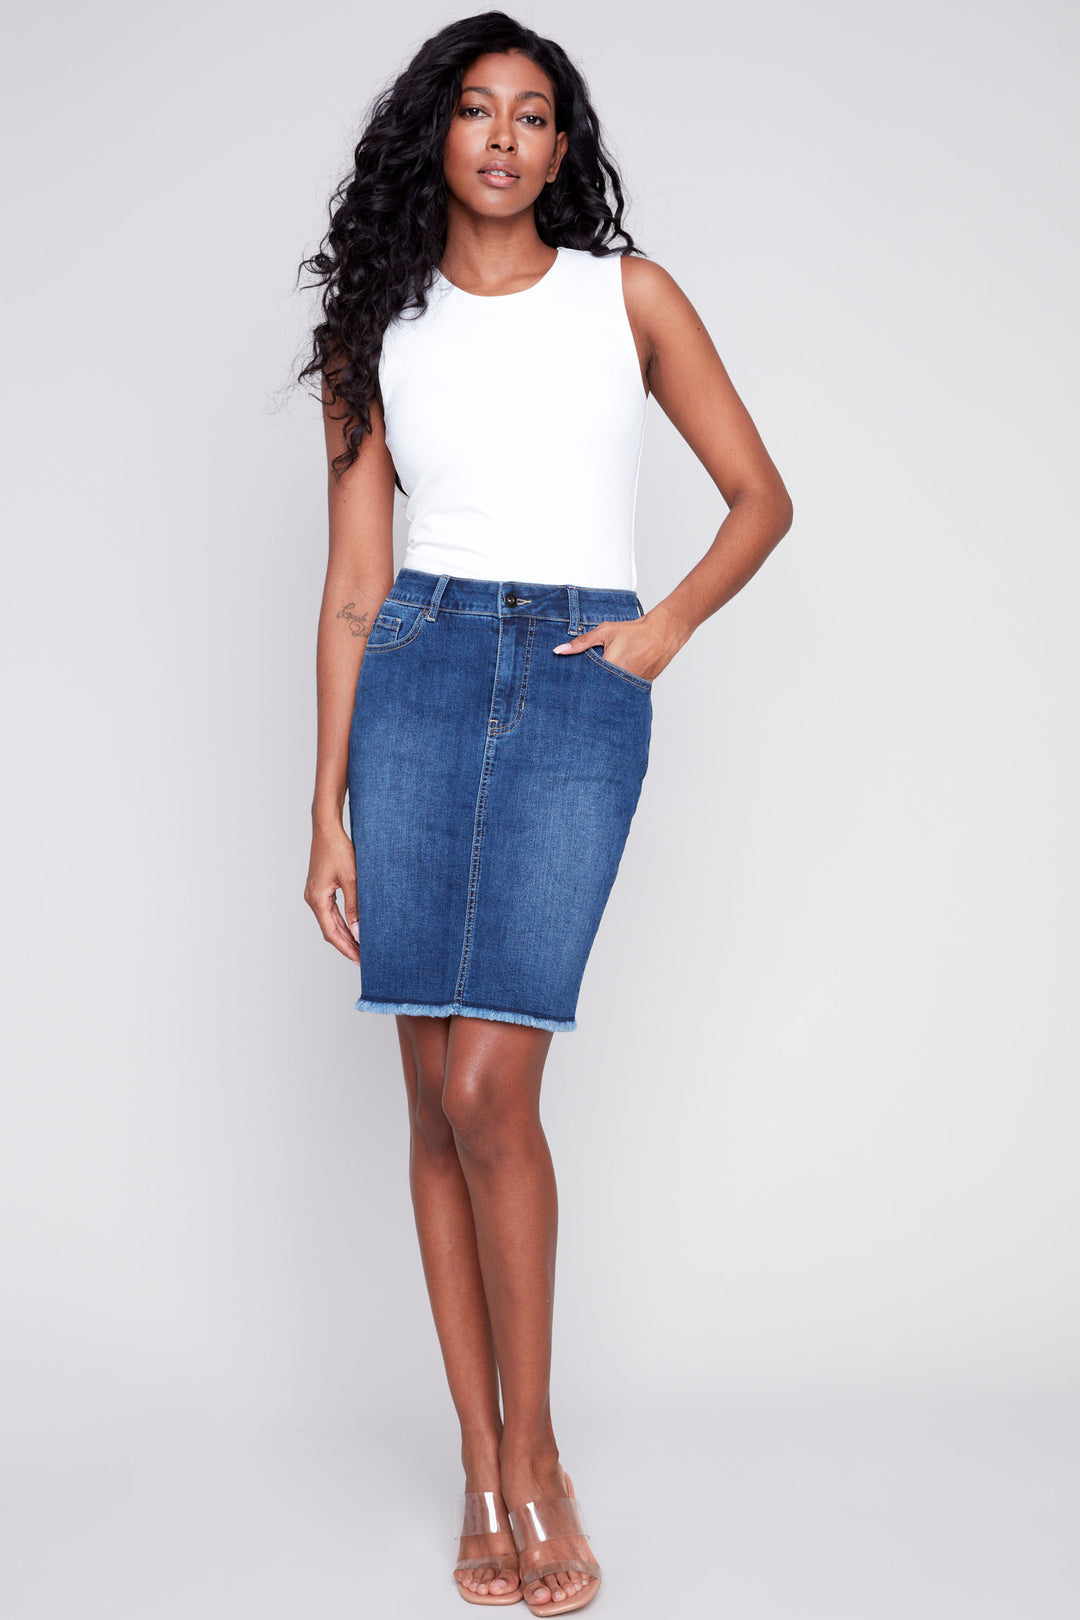 Made with 5 pockets and a classic denim design, this skirt will elevate any outfit. Its standard rise and signature frayed hem add a touch of luxury, making it the star of the show! 